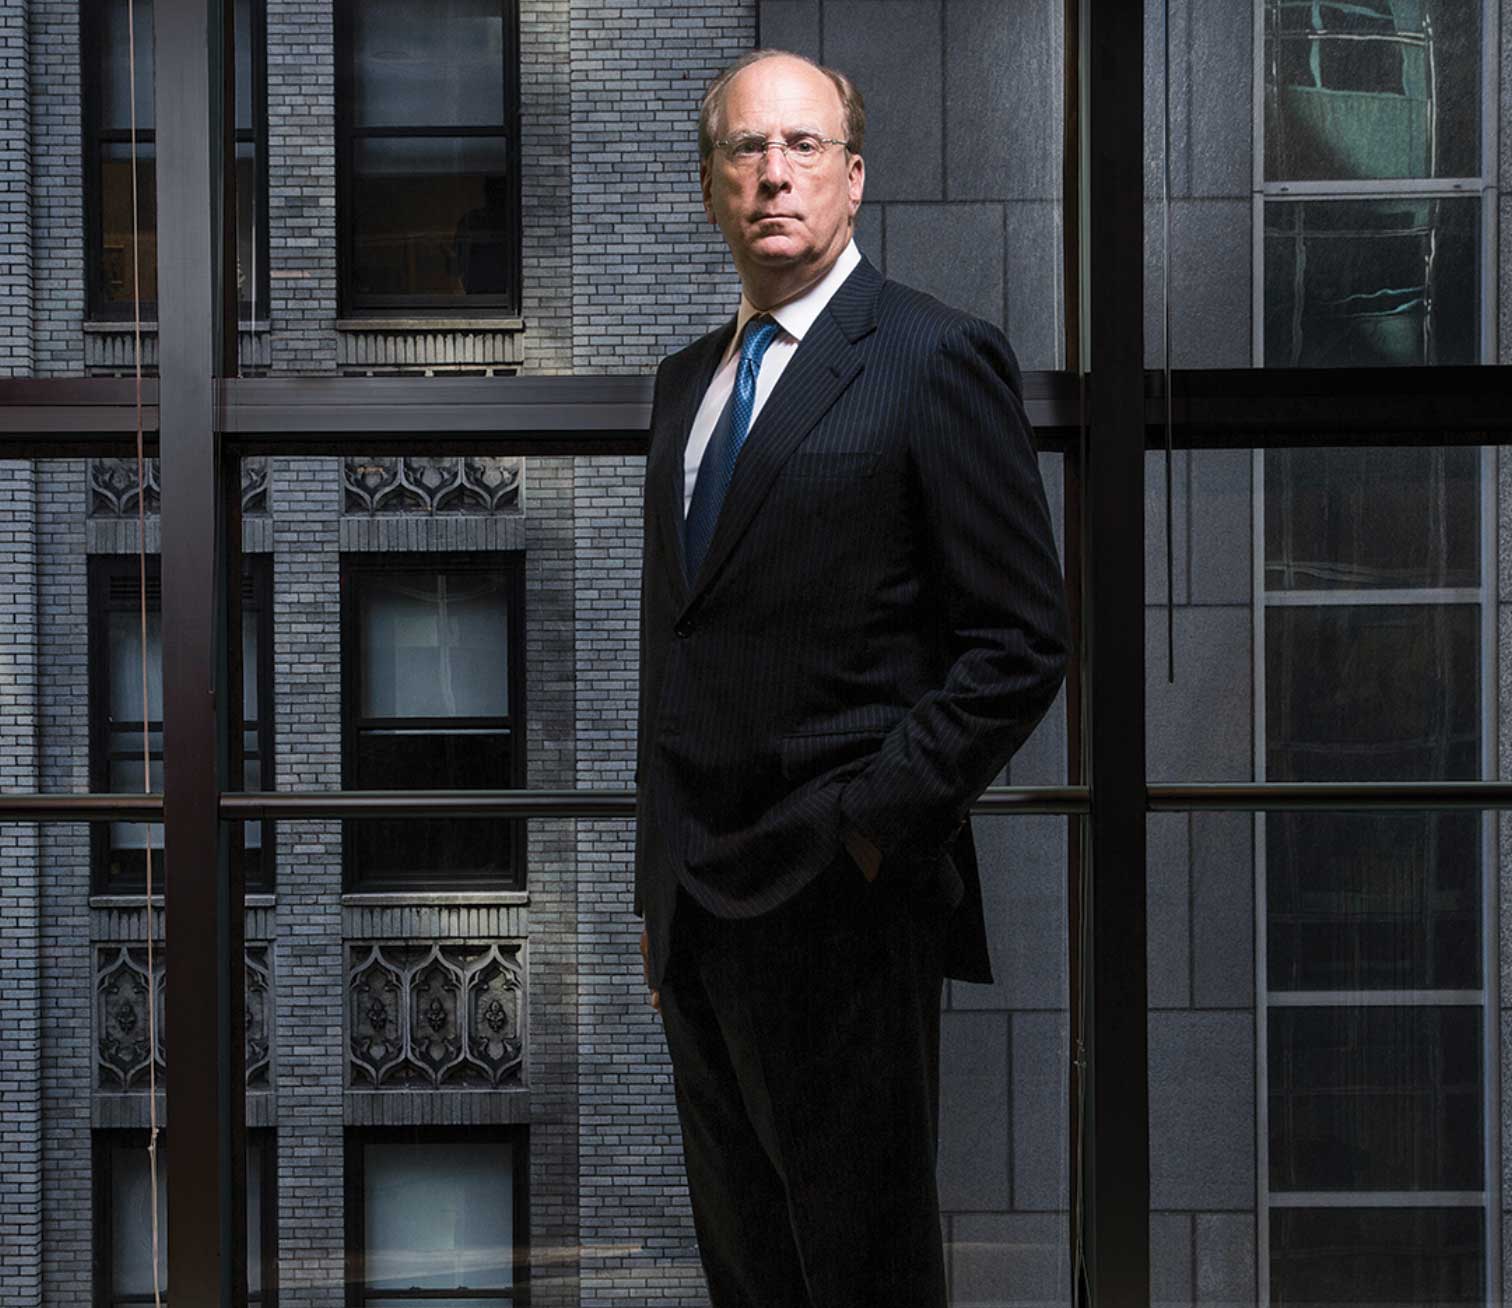 Larry Fink. <br><br>

Look up Blackrock. They practically own the world and decide which direction we are heading by brainwashing people and manipulating companies worldwide by having a tight grip on the economy and a shit-ton of money.<br><br>

Seriously, this company is the worst and Larry Fink is the closest person to dystopic evil villain we will probably ever get.